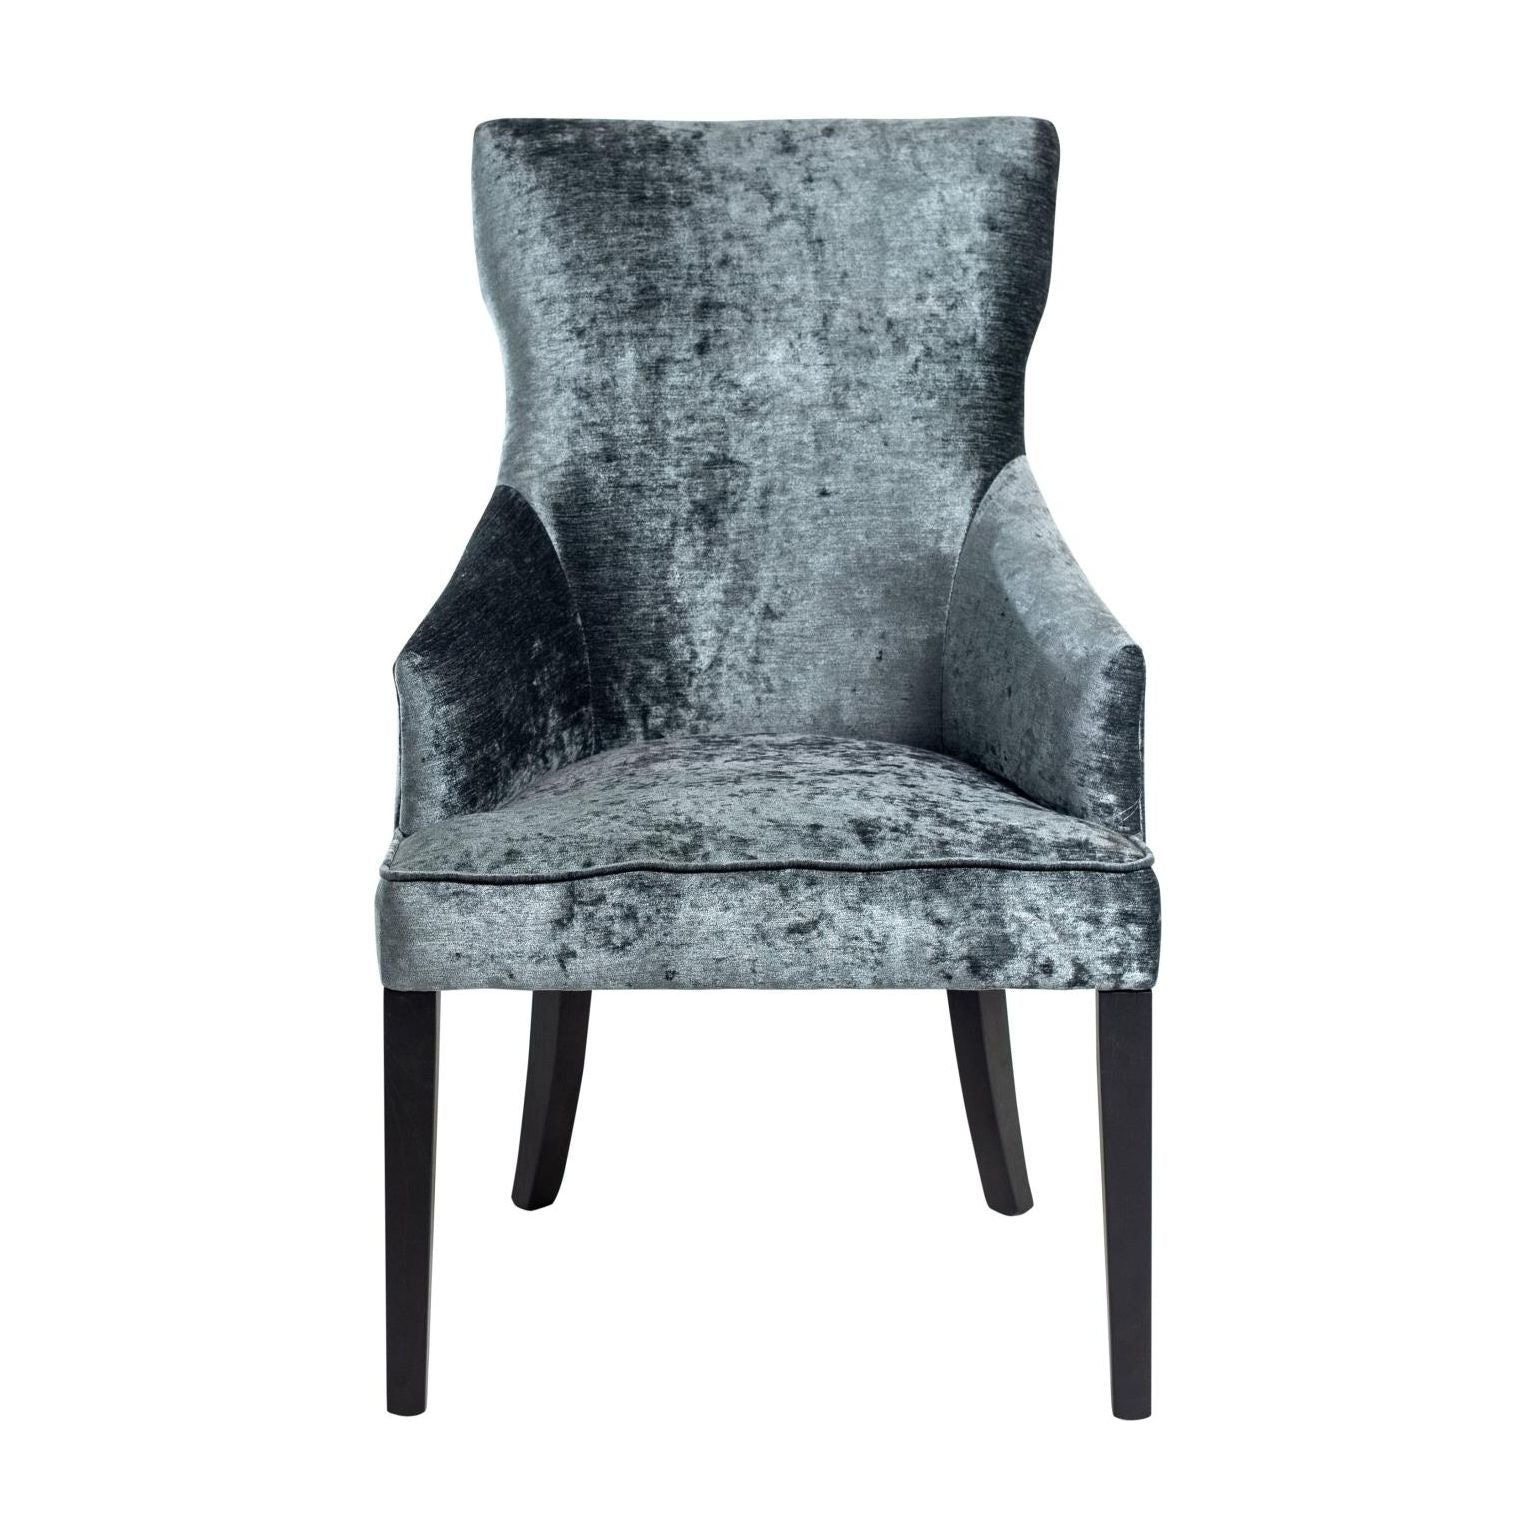 An elegant High Back Dining Chair with a high back and armrests, upholstered in gray crushed velvet, set against a white background. The chair's legs are dark, providing a stark contrast to the light upholstery.